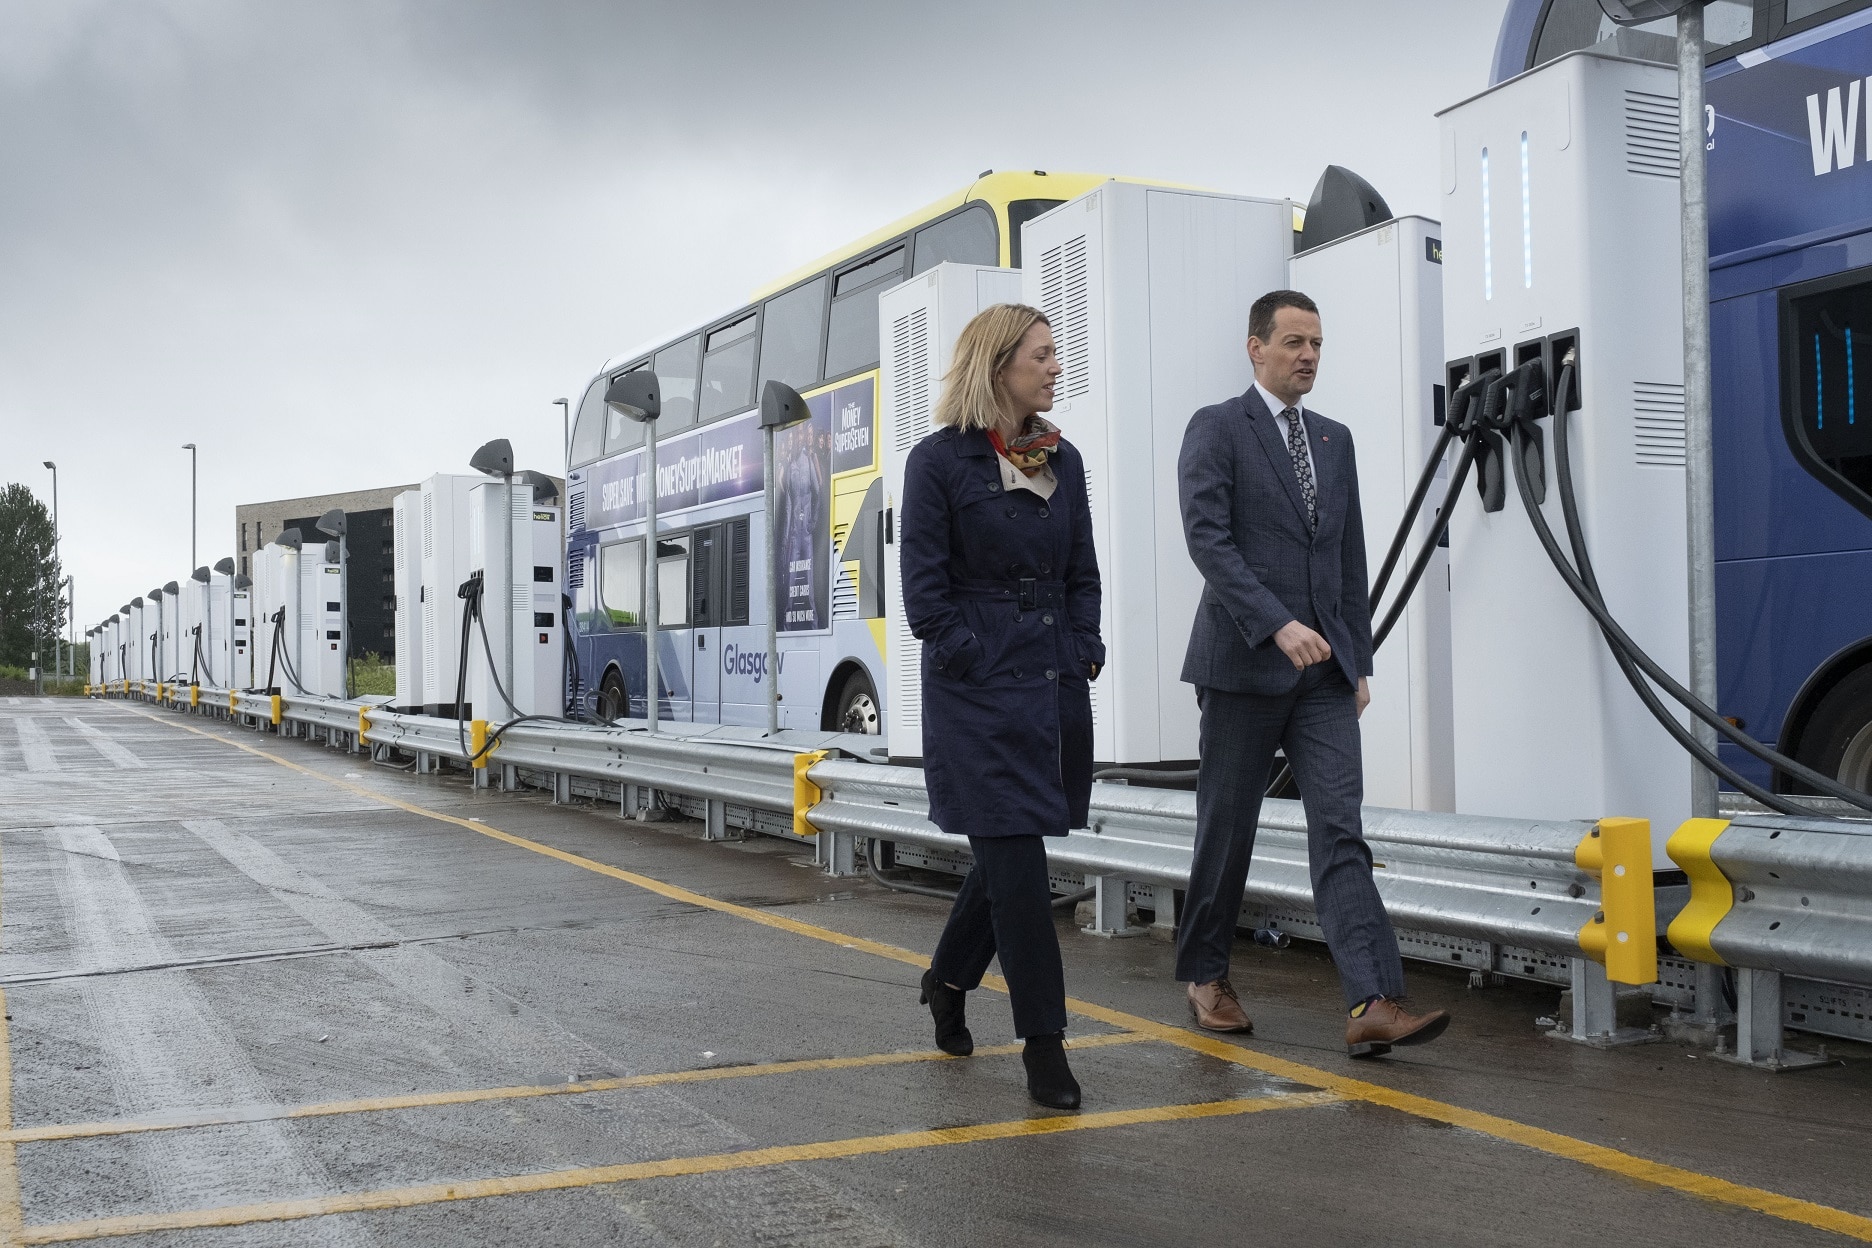 First Glasgow to expand Caledonia depot charging to 350 vehicles